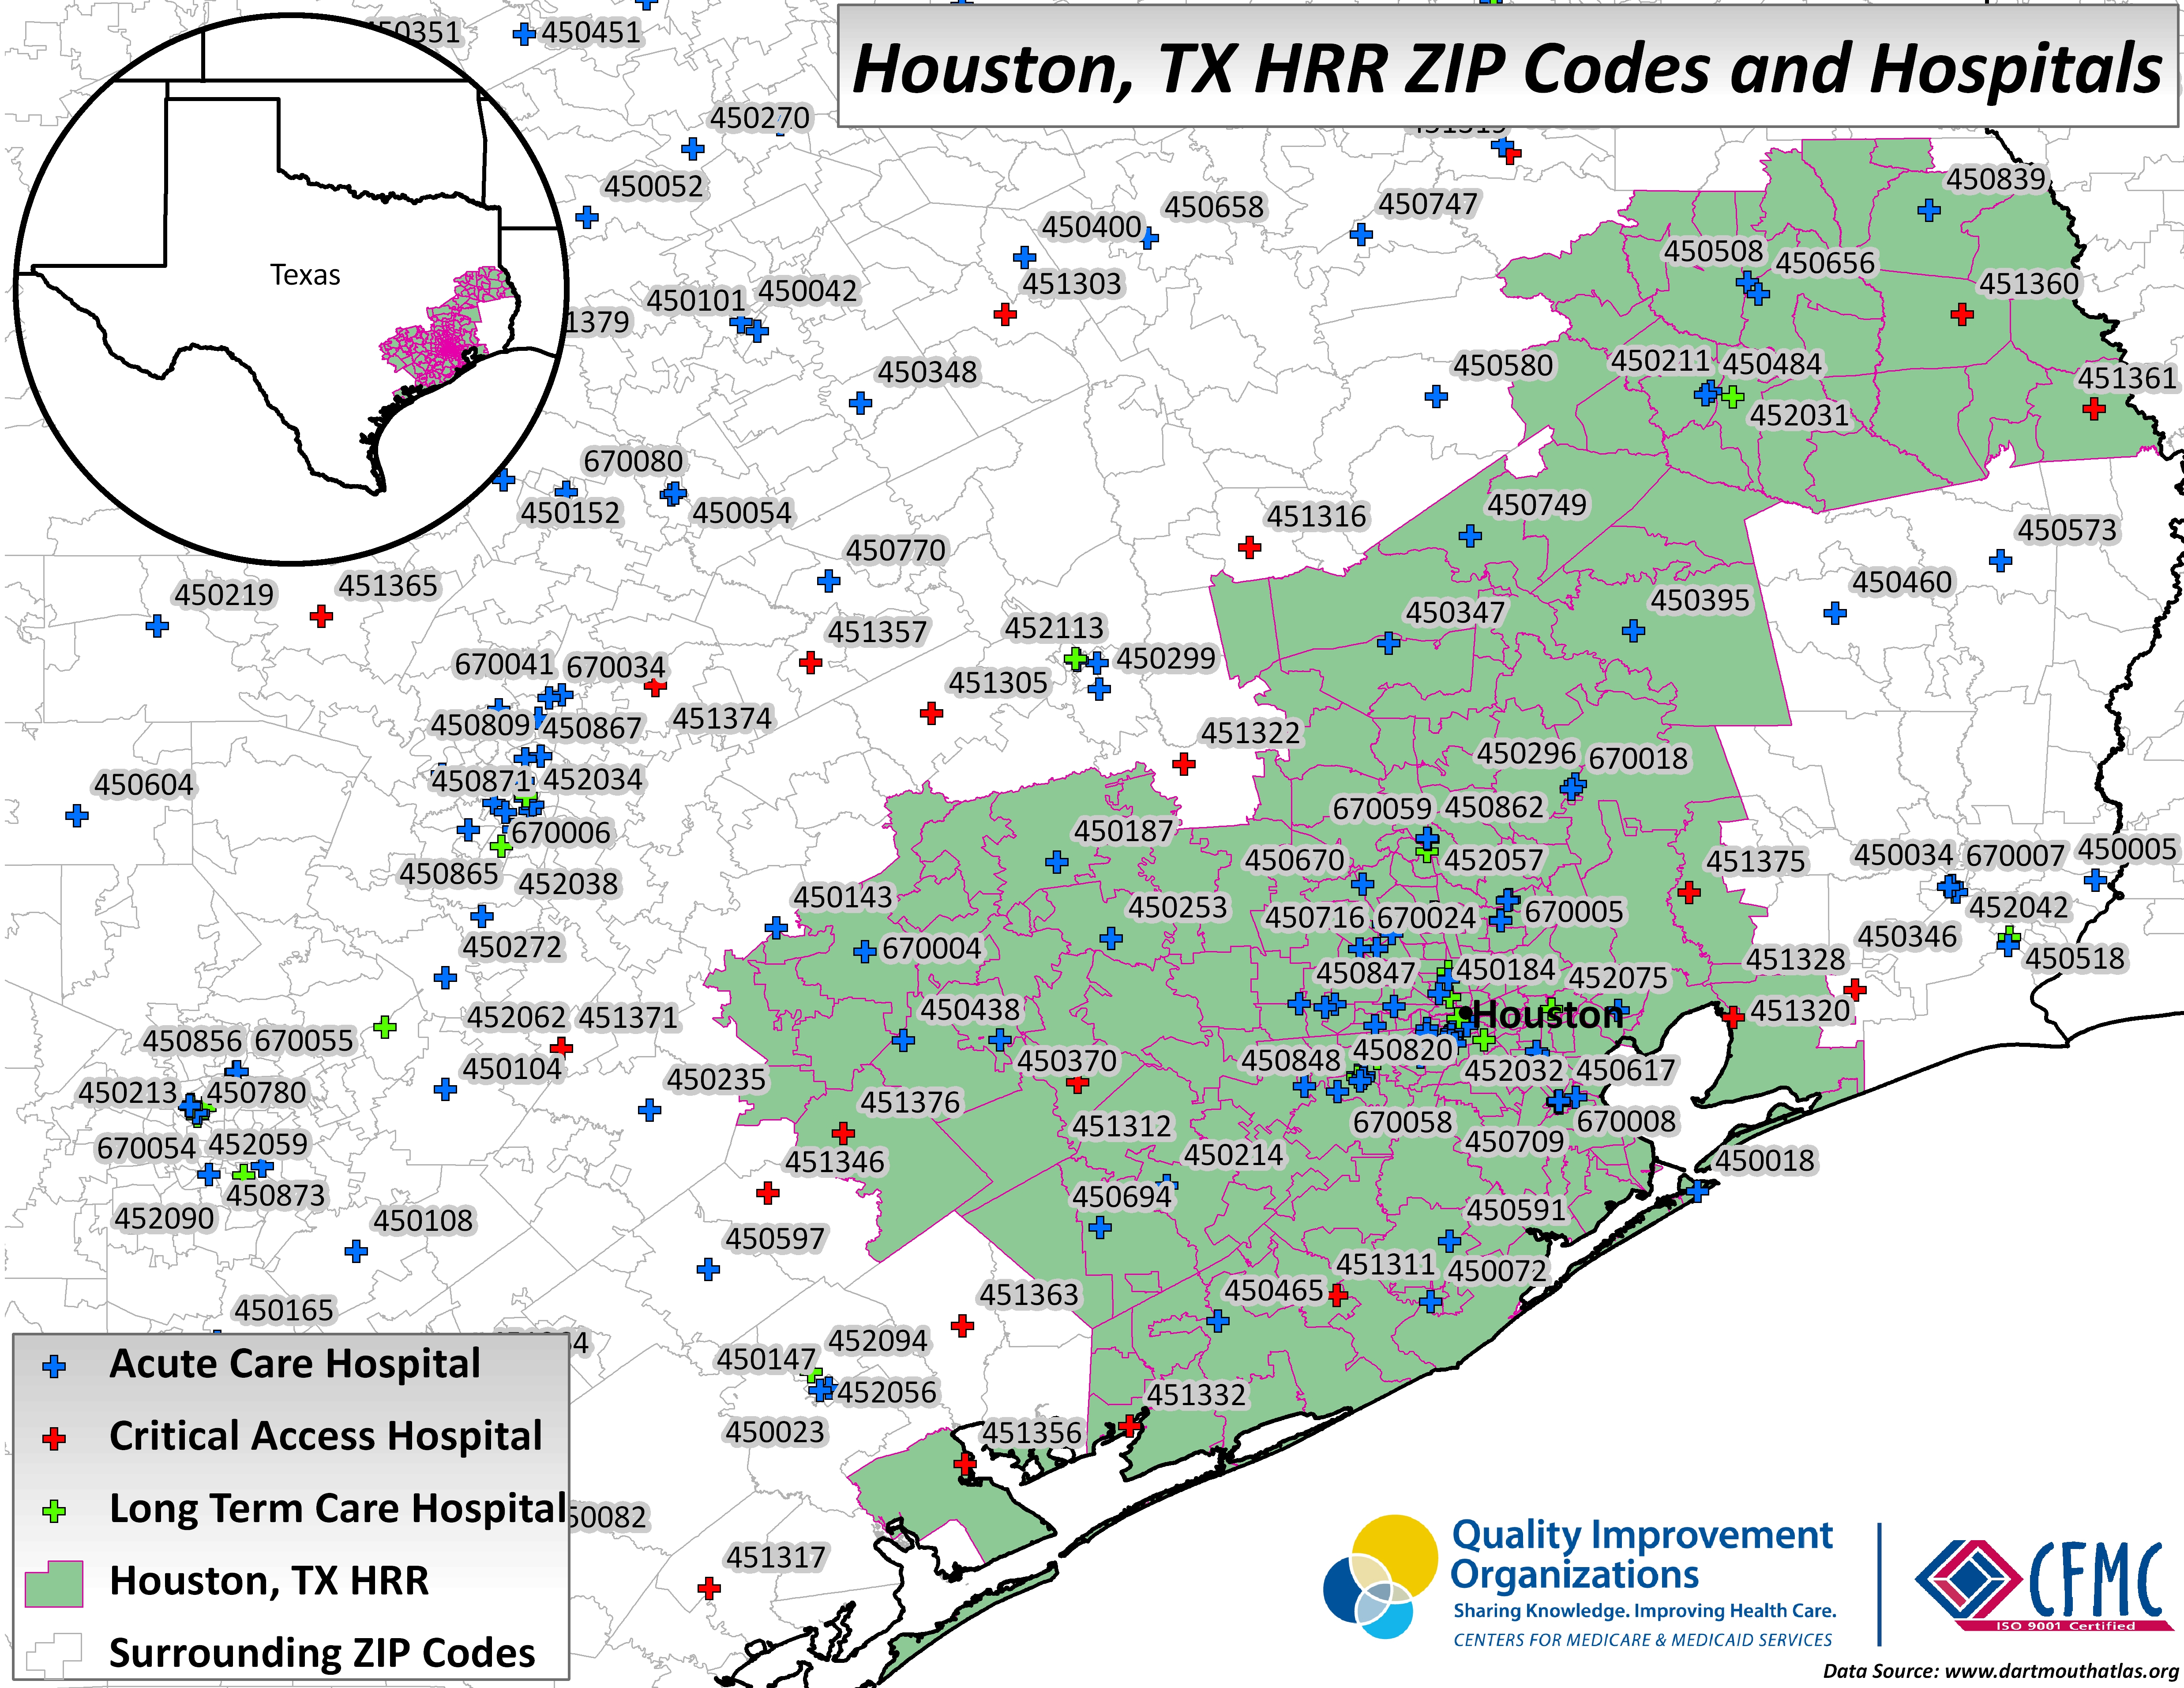 A map showing the location of healthcare providers by type in the area around Houston, Texas.